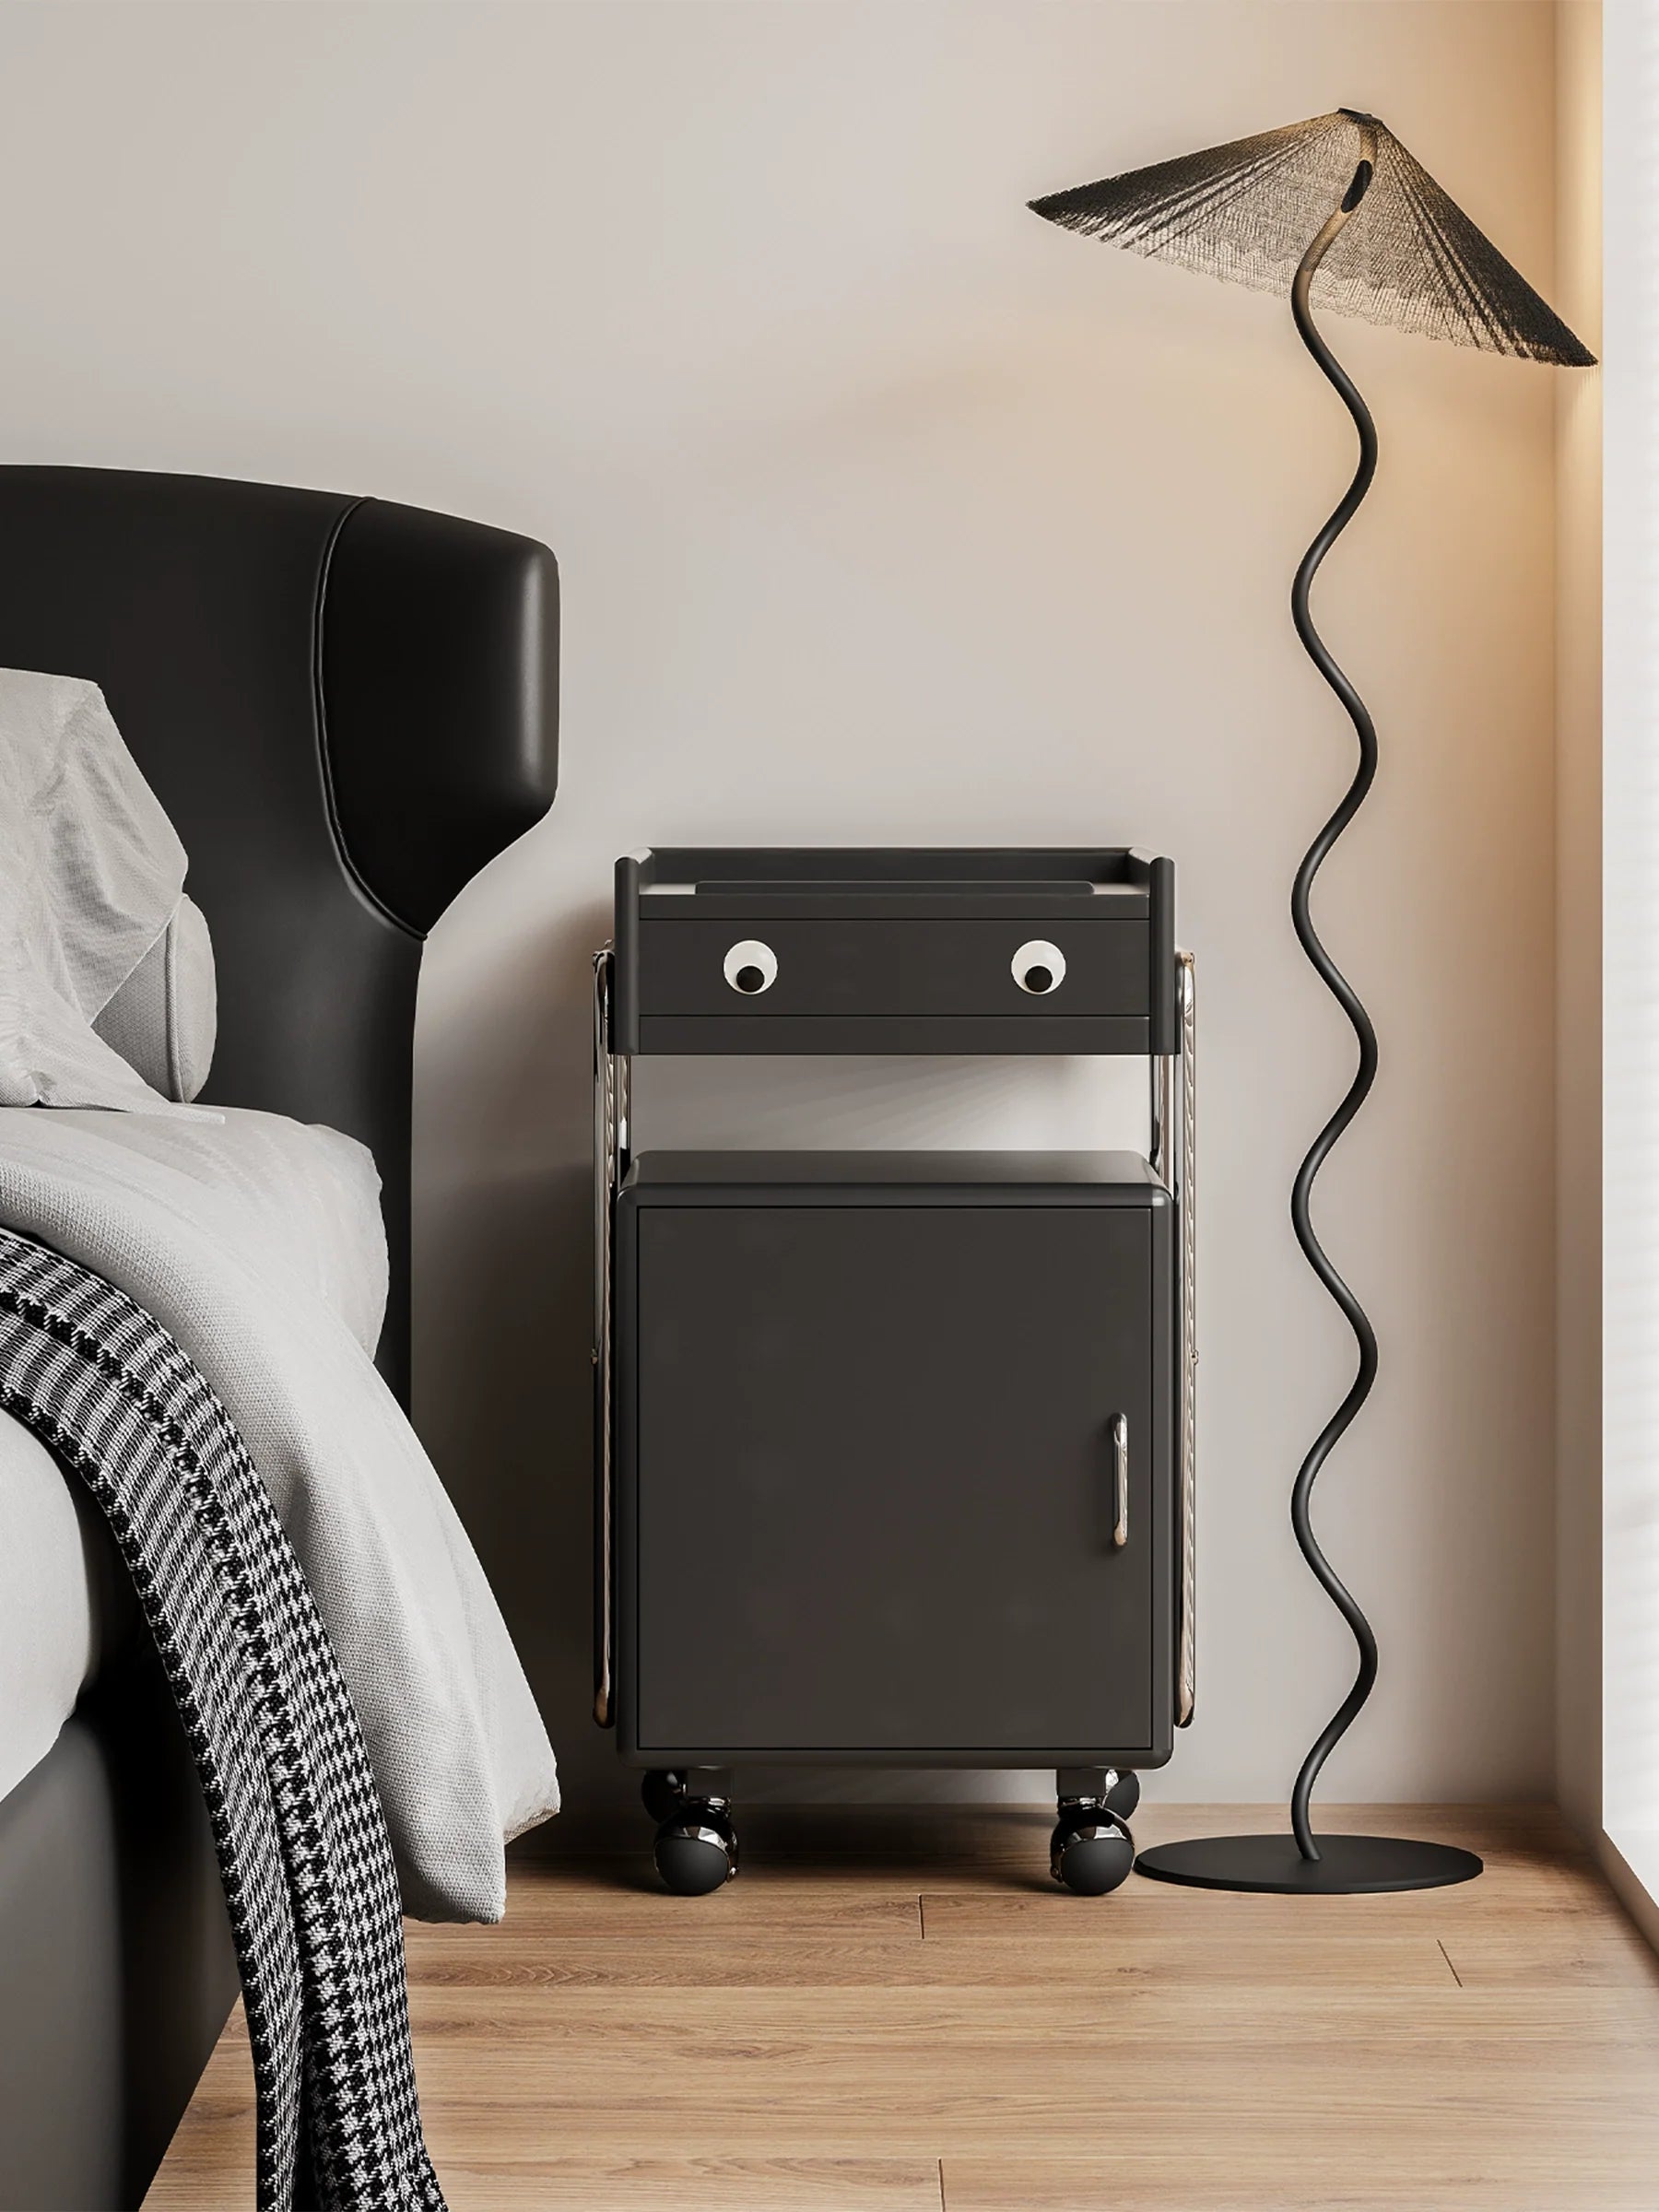 Platypus Robot Cabinet from GUJI